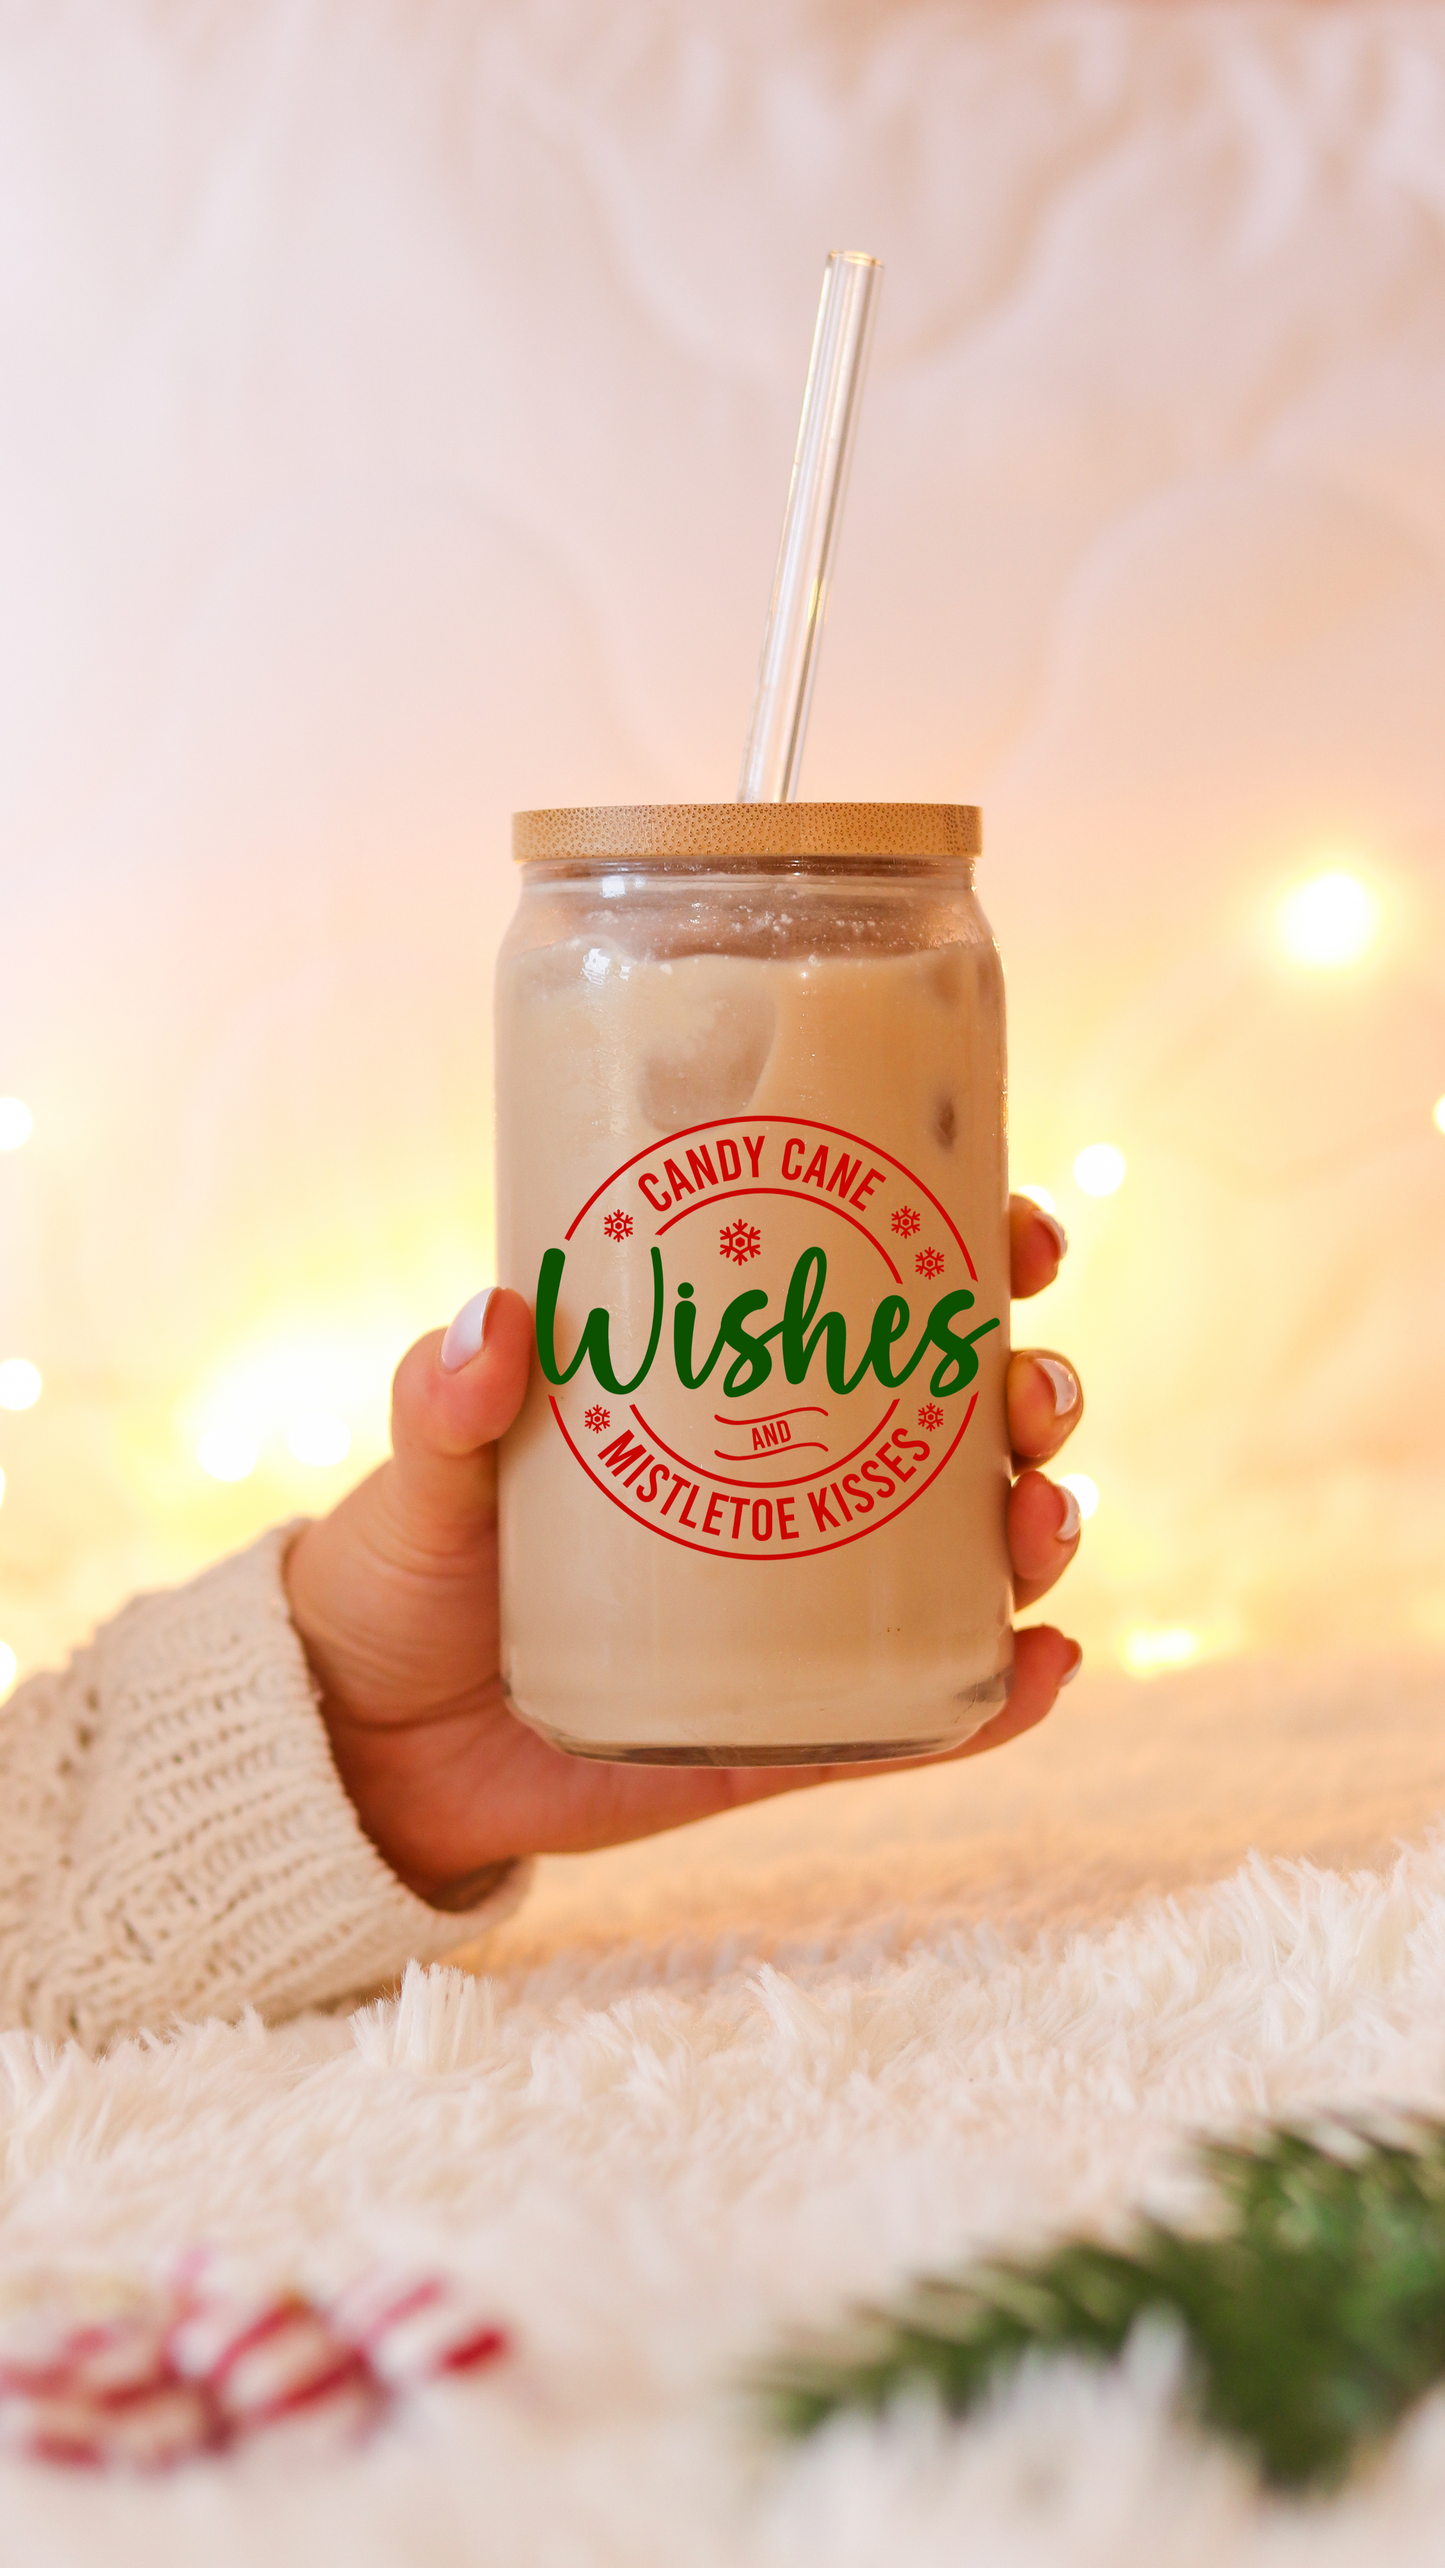 Candy Cane Wishes and Mistletoe Kisses Iced Coffee Glass